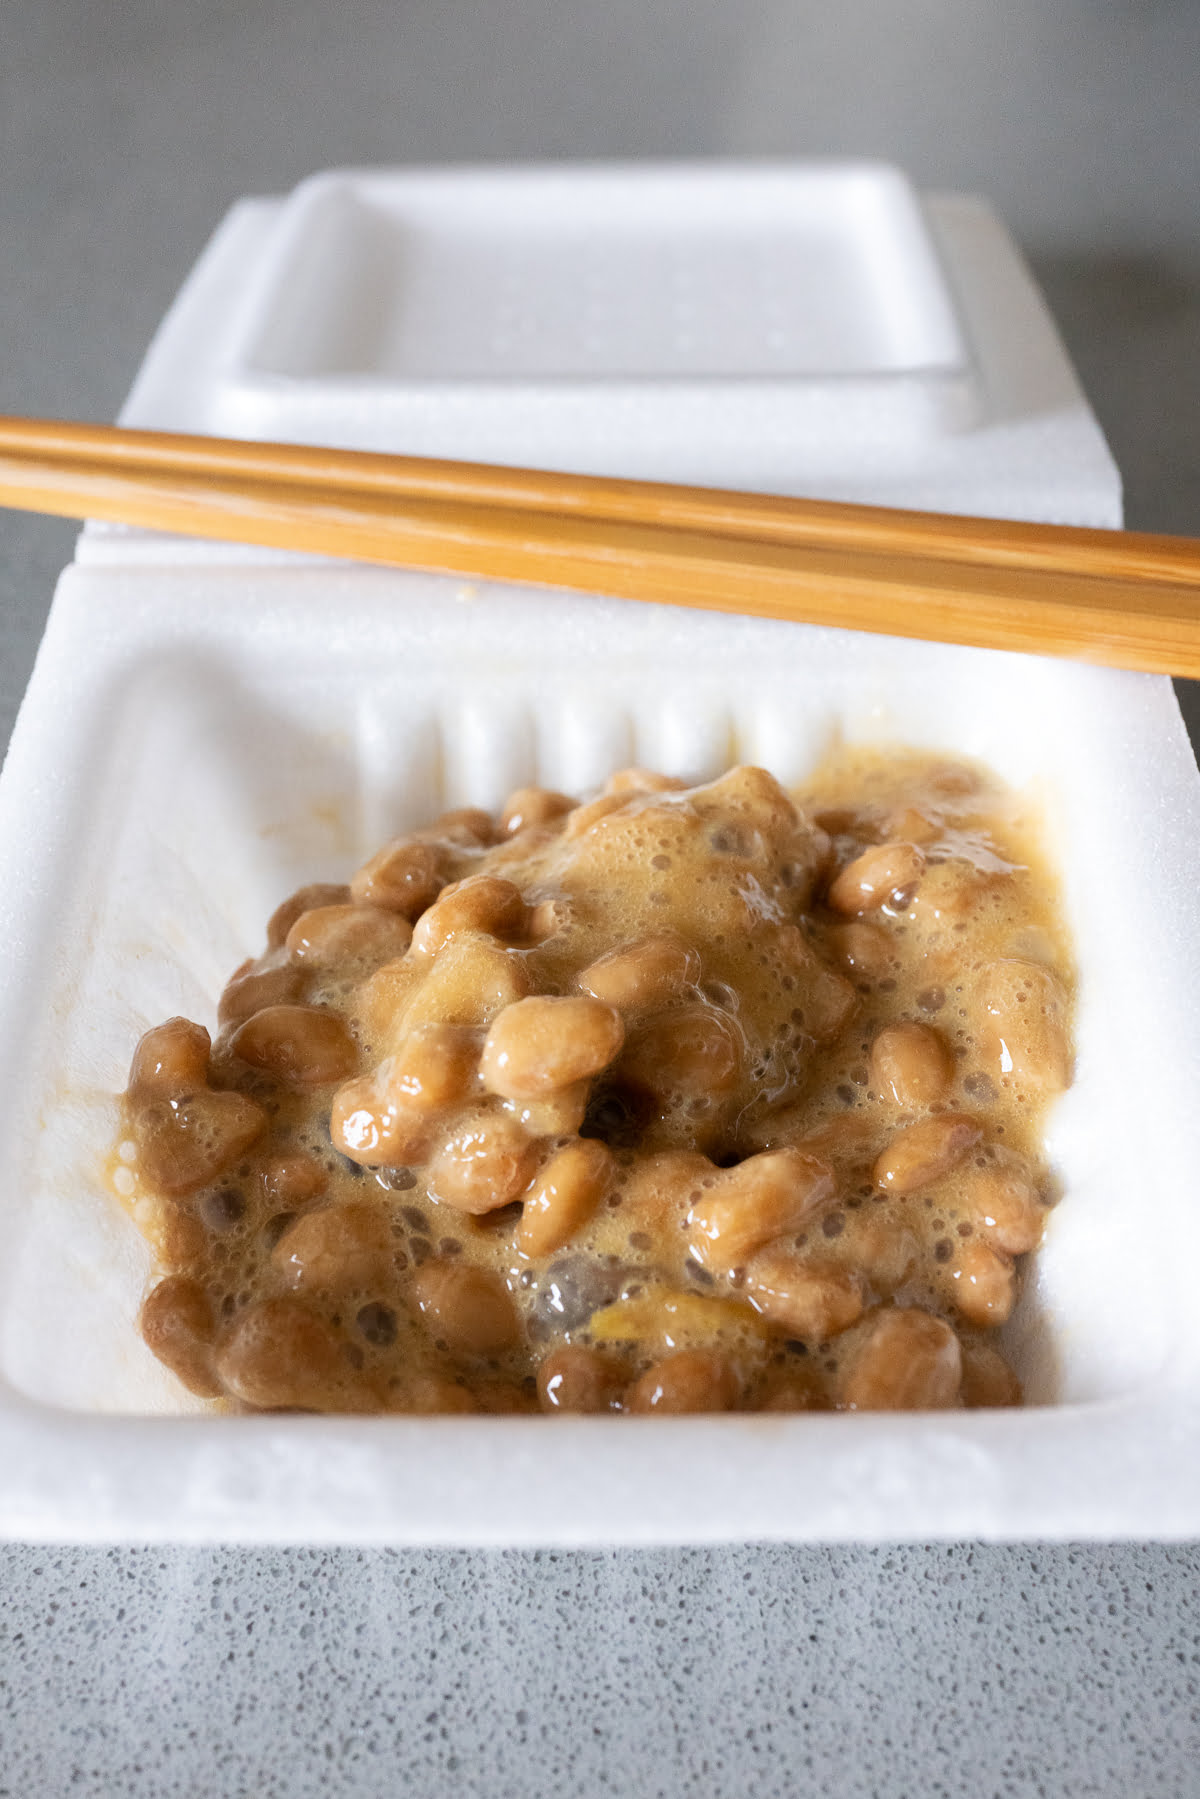 A container of natto, just mixed with the soy sauce and mustard packets.